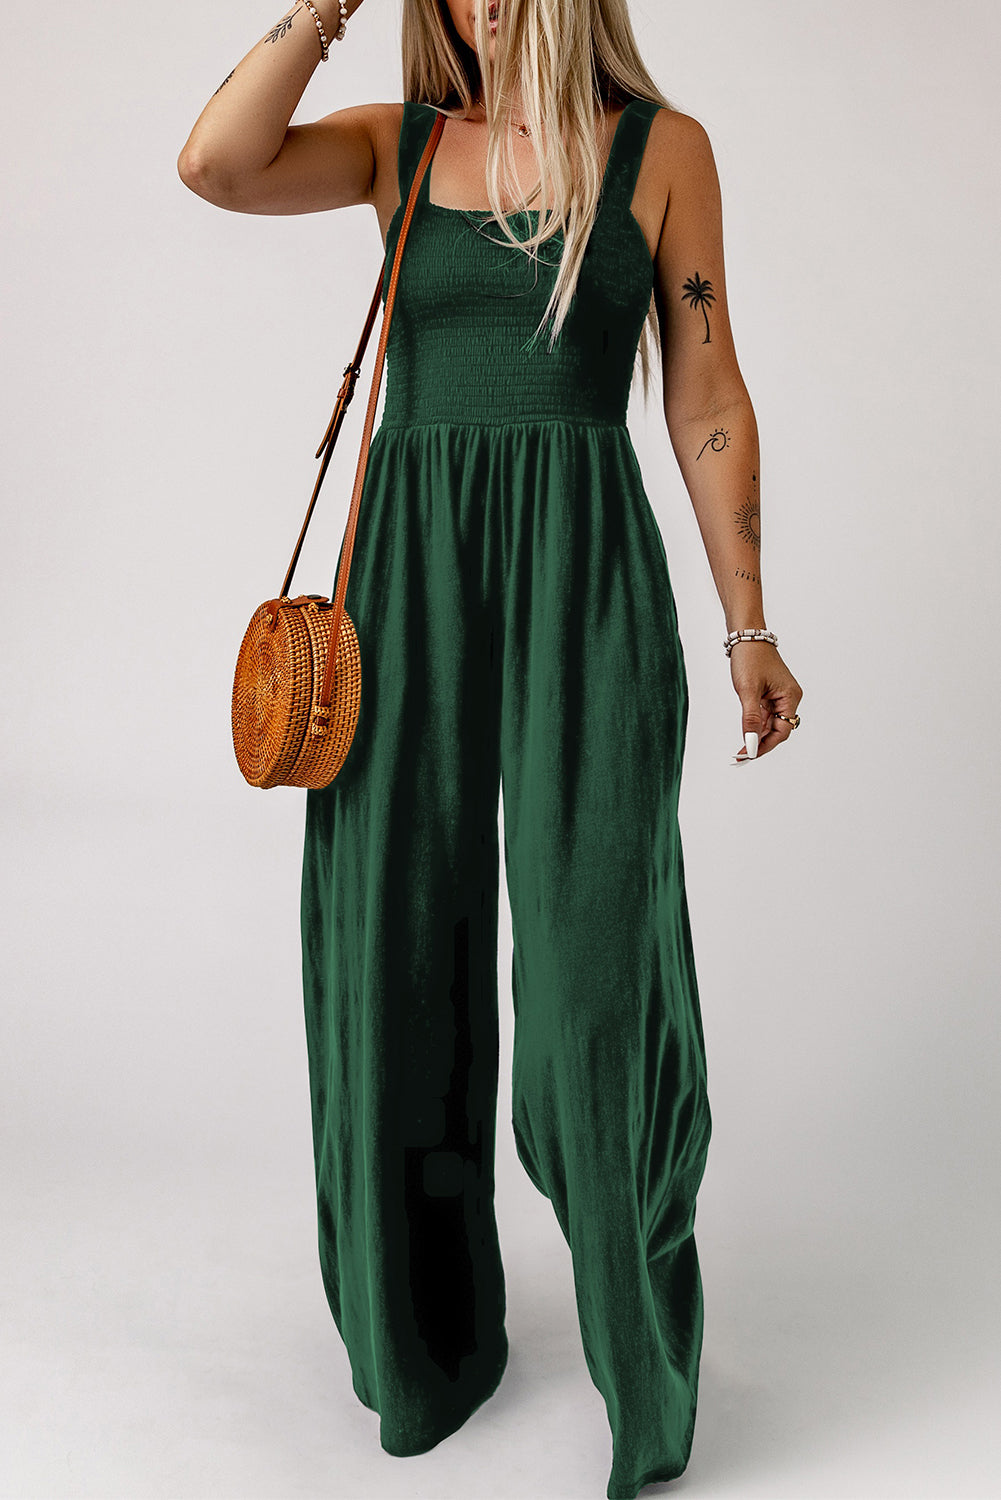  Square Neck Smocked Flowy Long Pants Rompers with Pockets  Womens 2023 Summer Sleeveless Tie Strap Smocked Wide Leg Jumpsuit Plus Size  Jumpsuits for Women Casual Sleeveless NJVUS30426GIFT7011 : Clothing, Shoes 